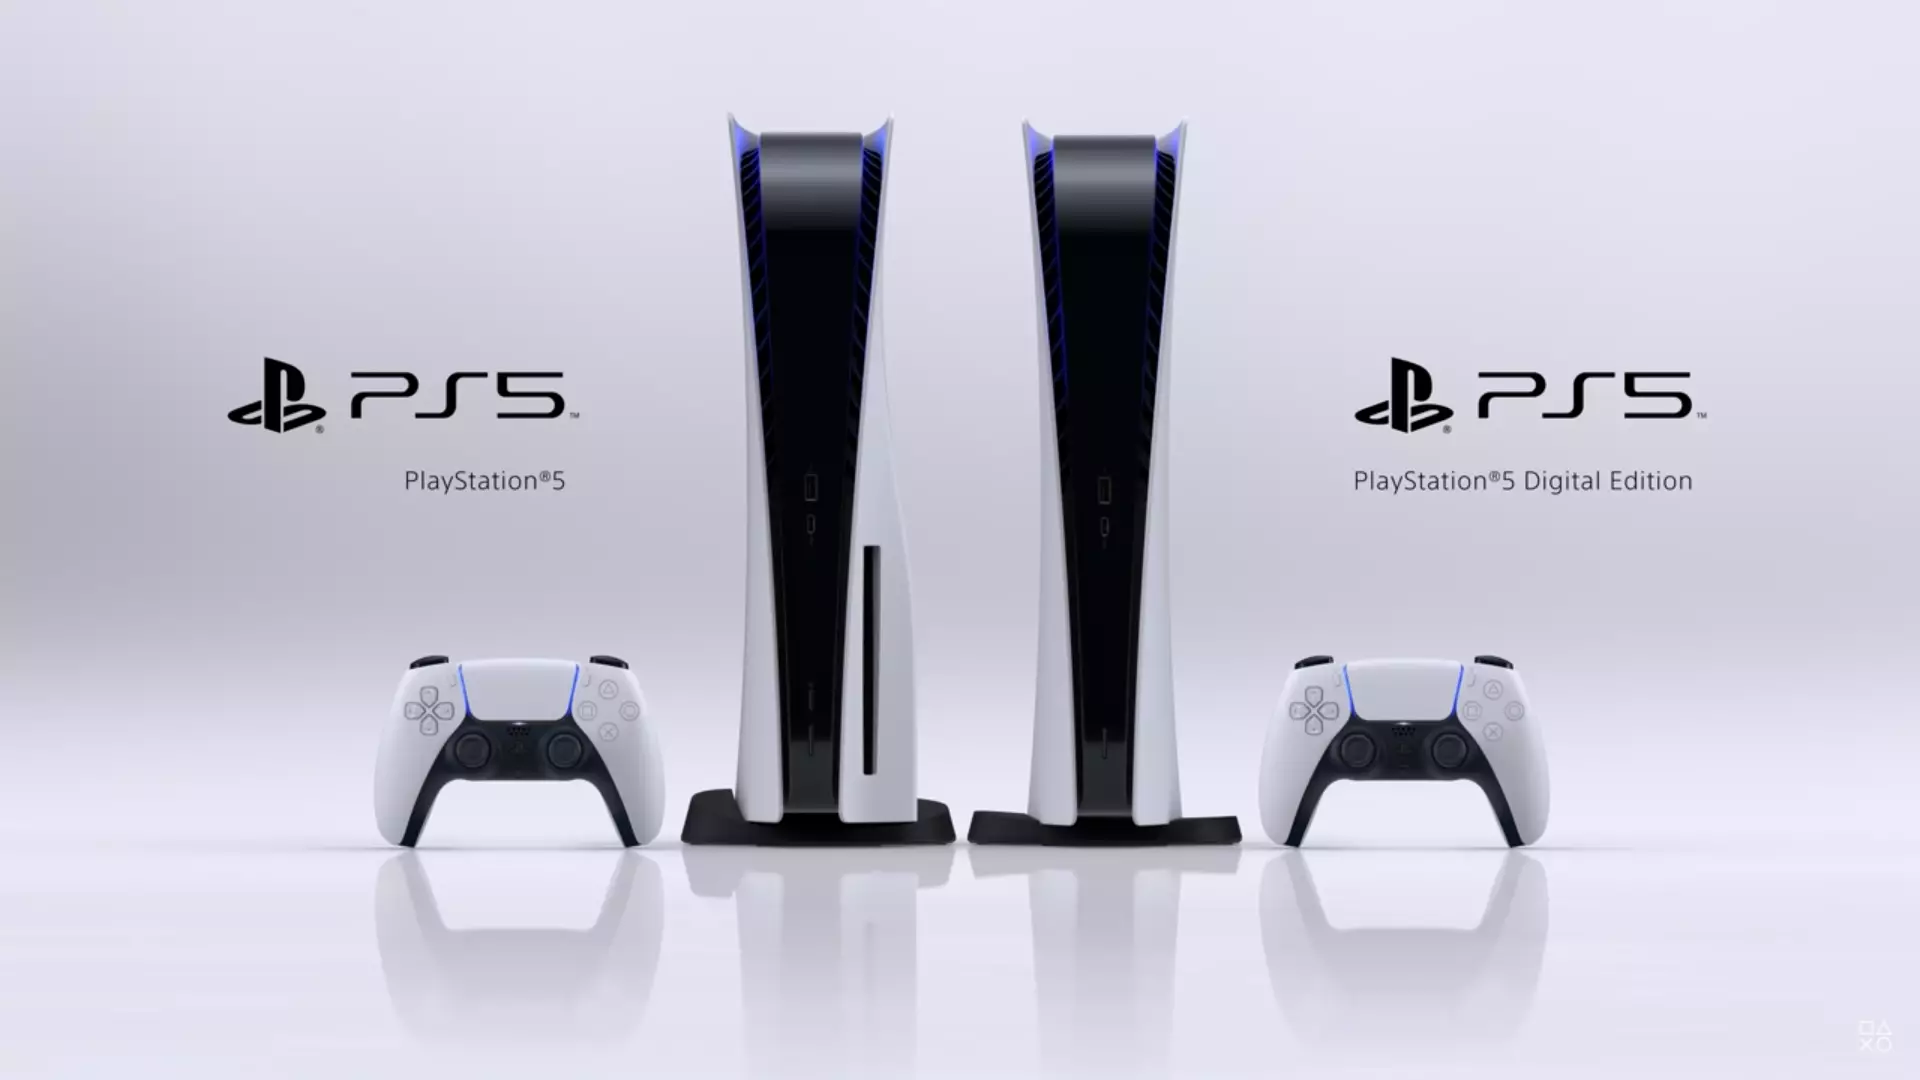 The two editions of the PlayStation 5 /